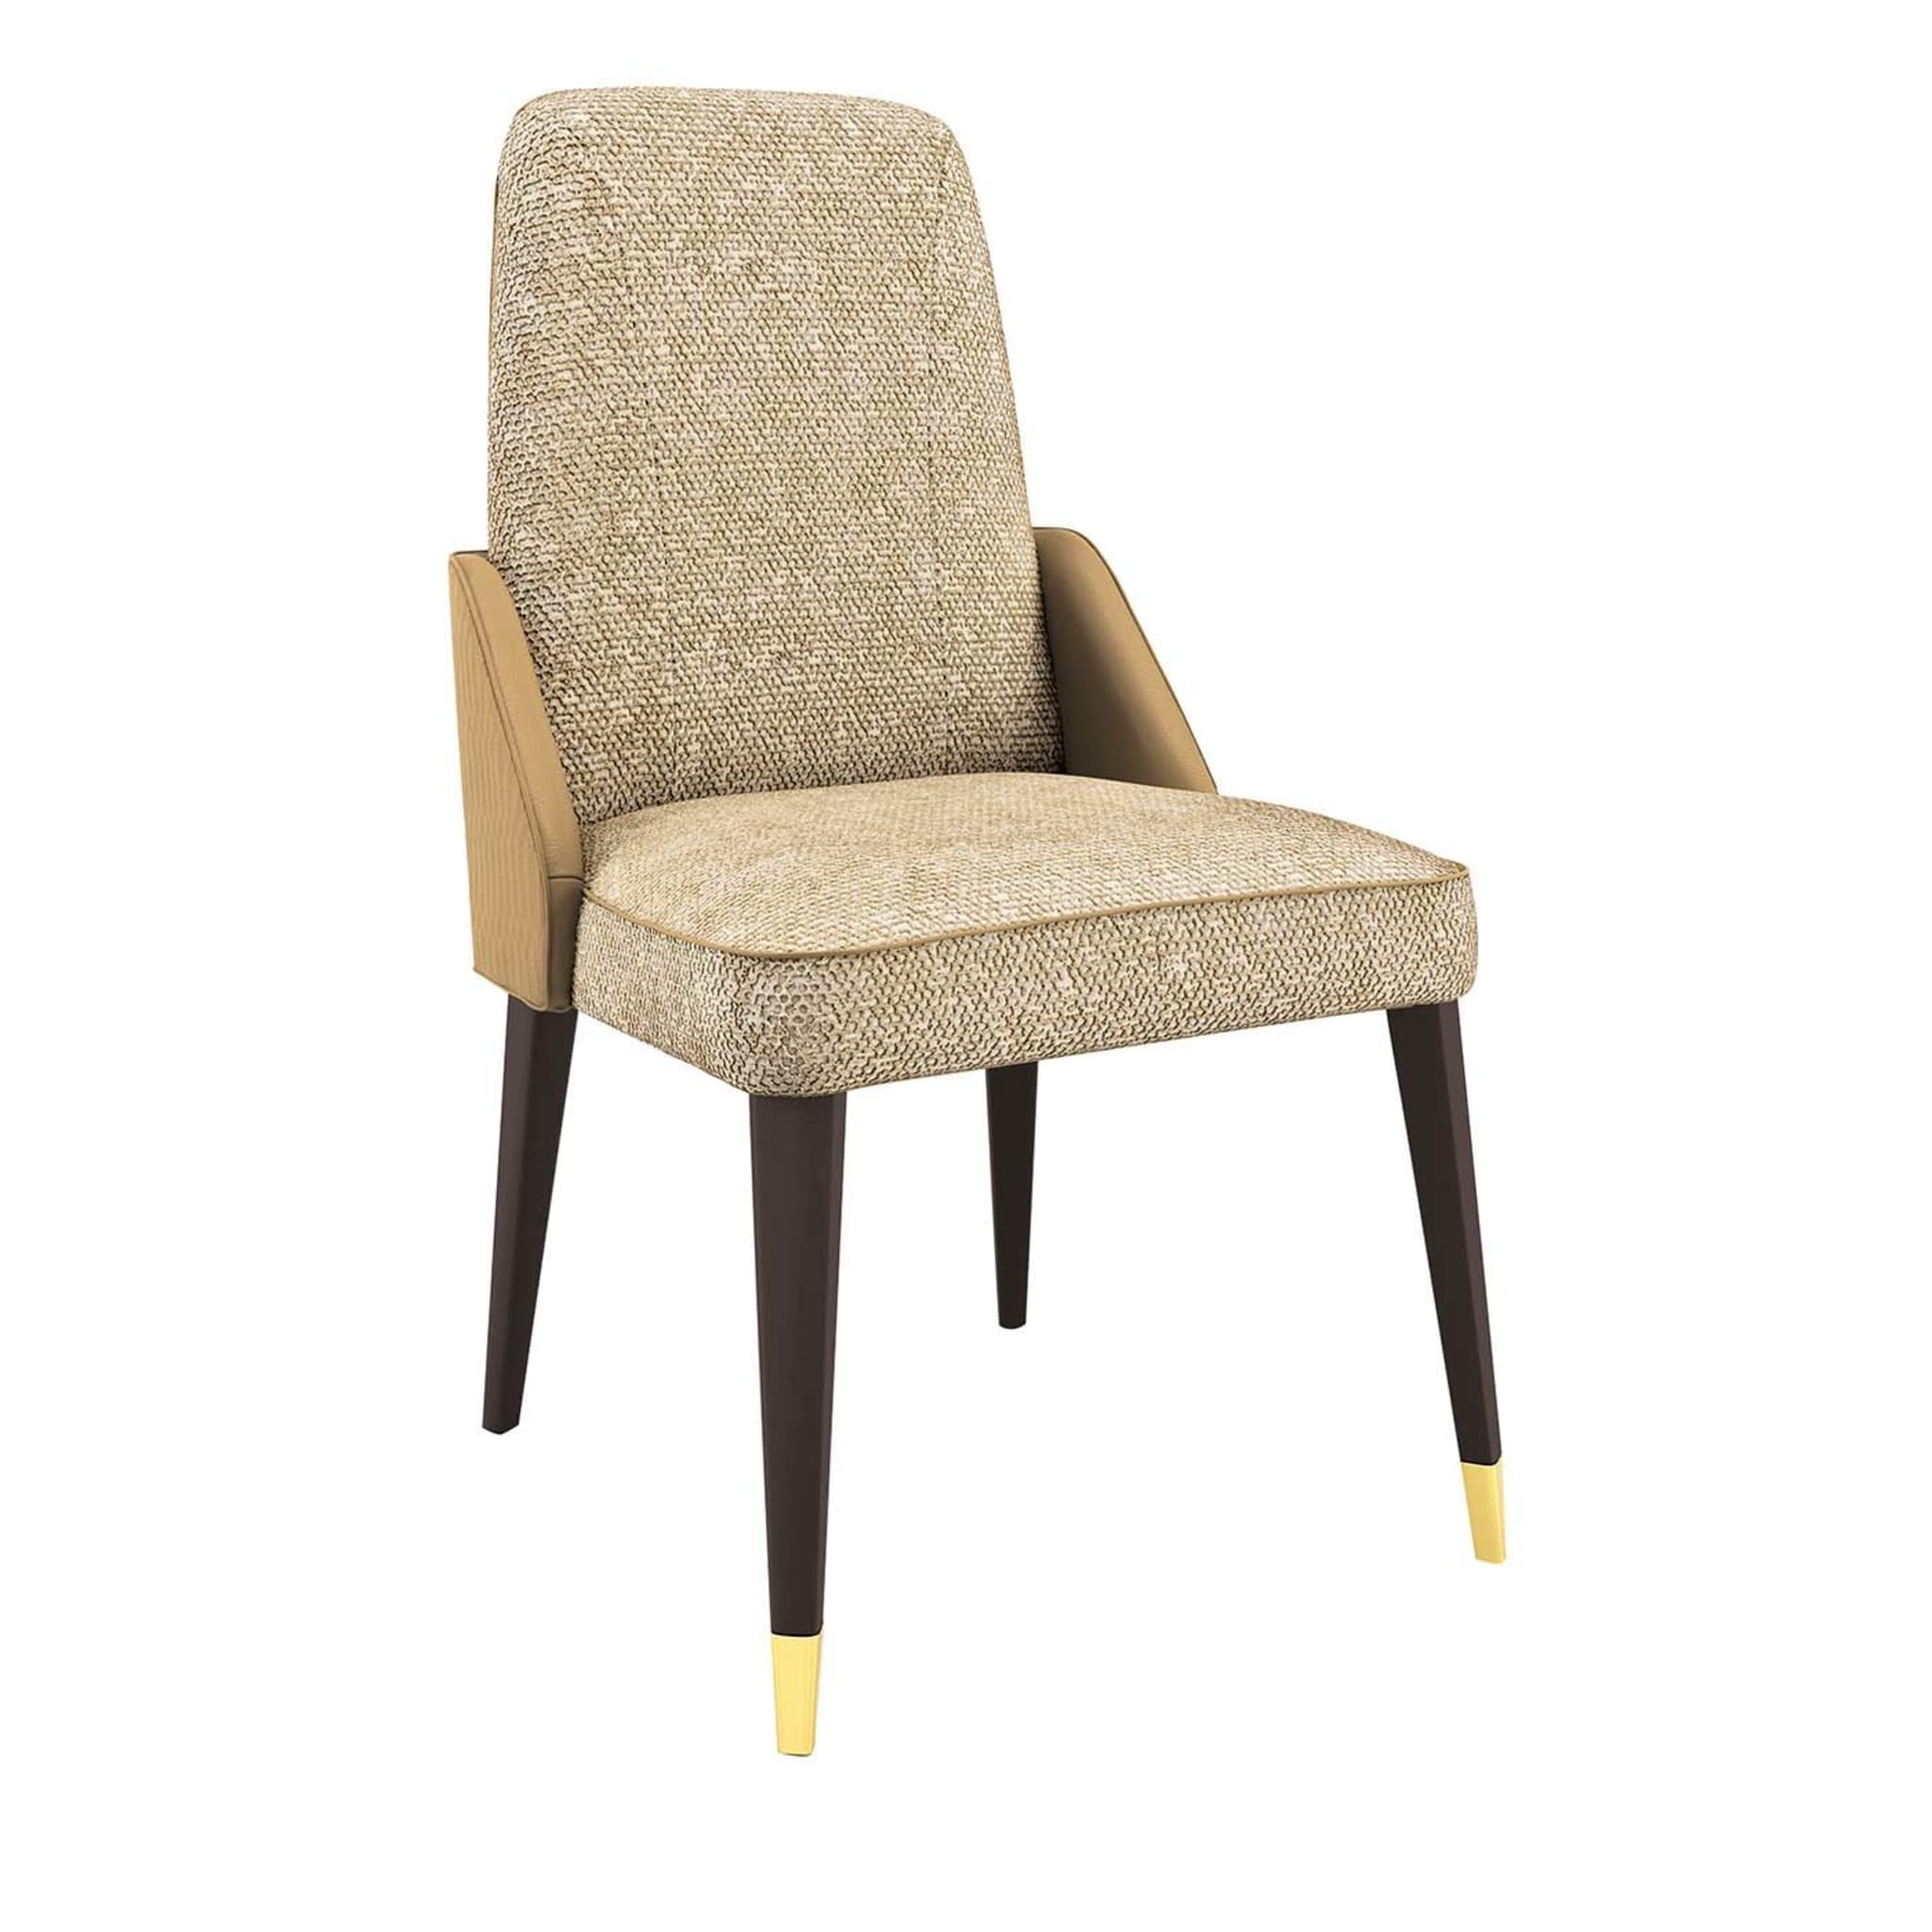 Caprice Dining Chair - Main view